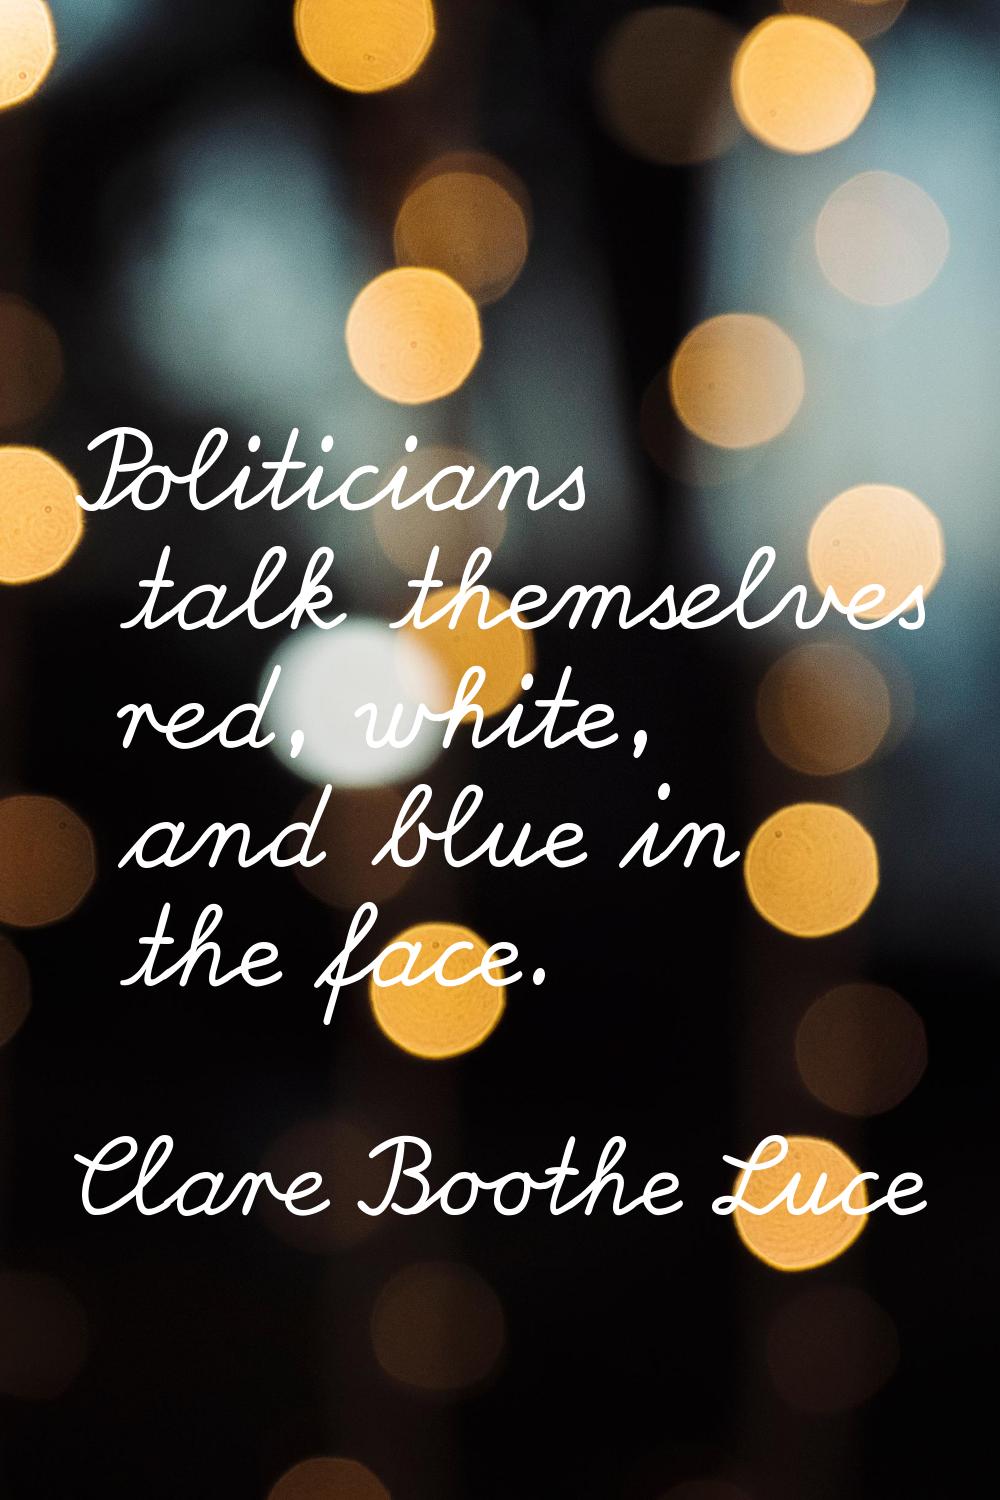 Politicians talk themselves red, white, and blue in the face.